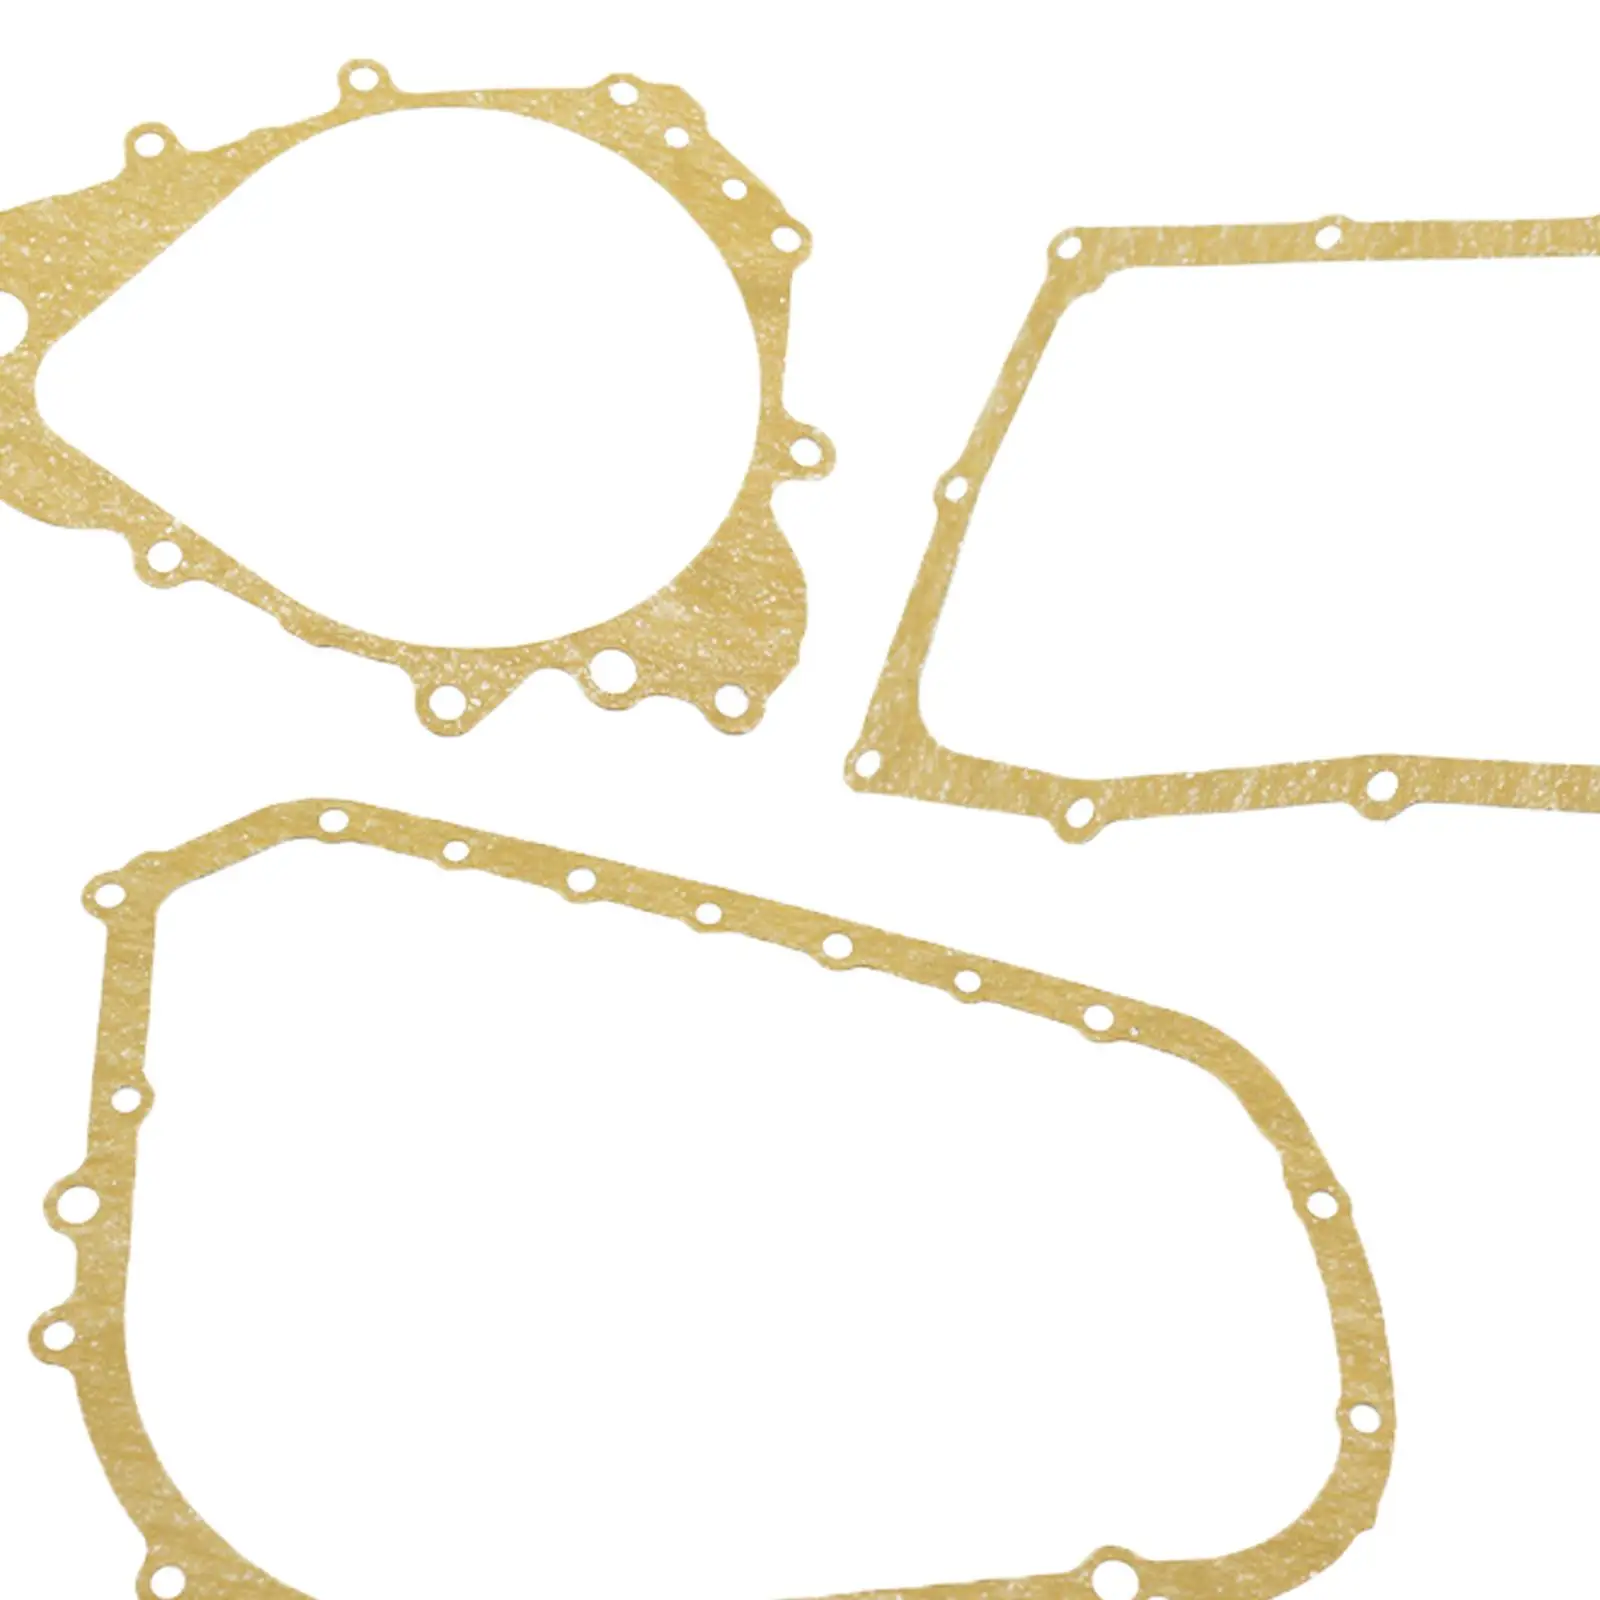 Clutch Oil  Gasket Spare Parts Replaces 018   2012-2018 Durable Easy to Install